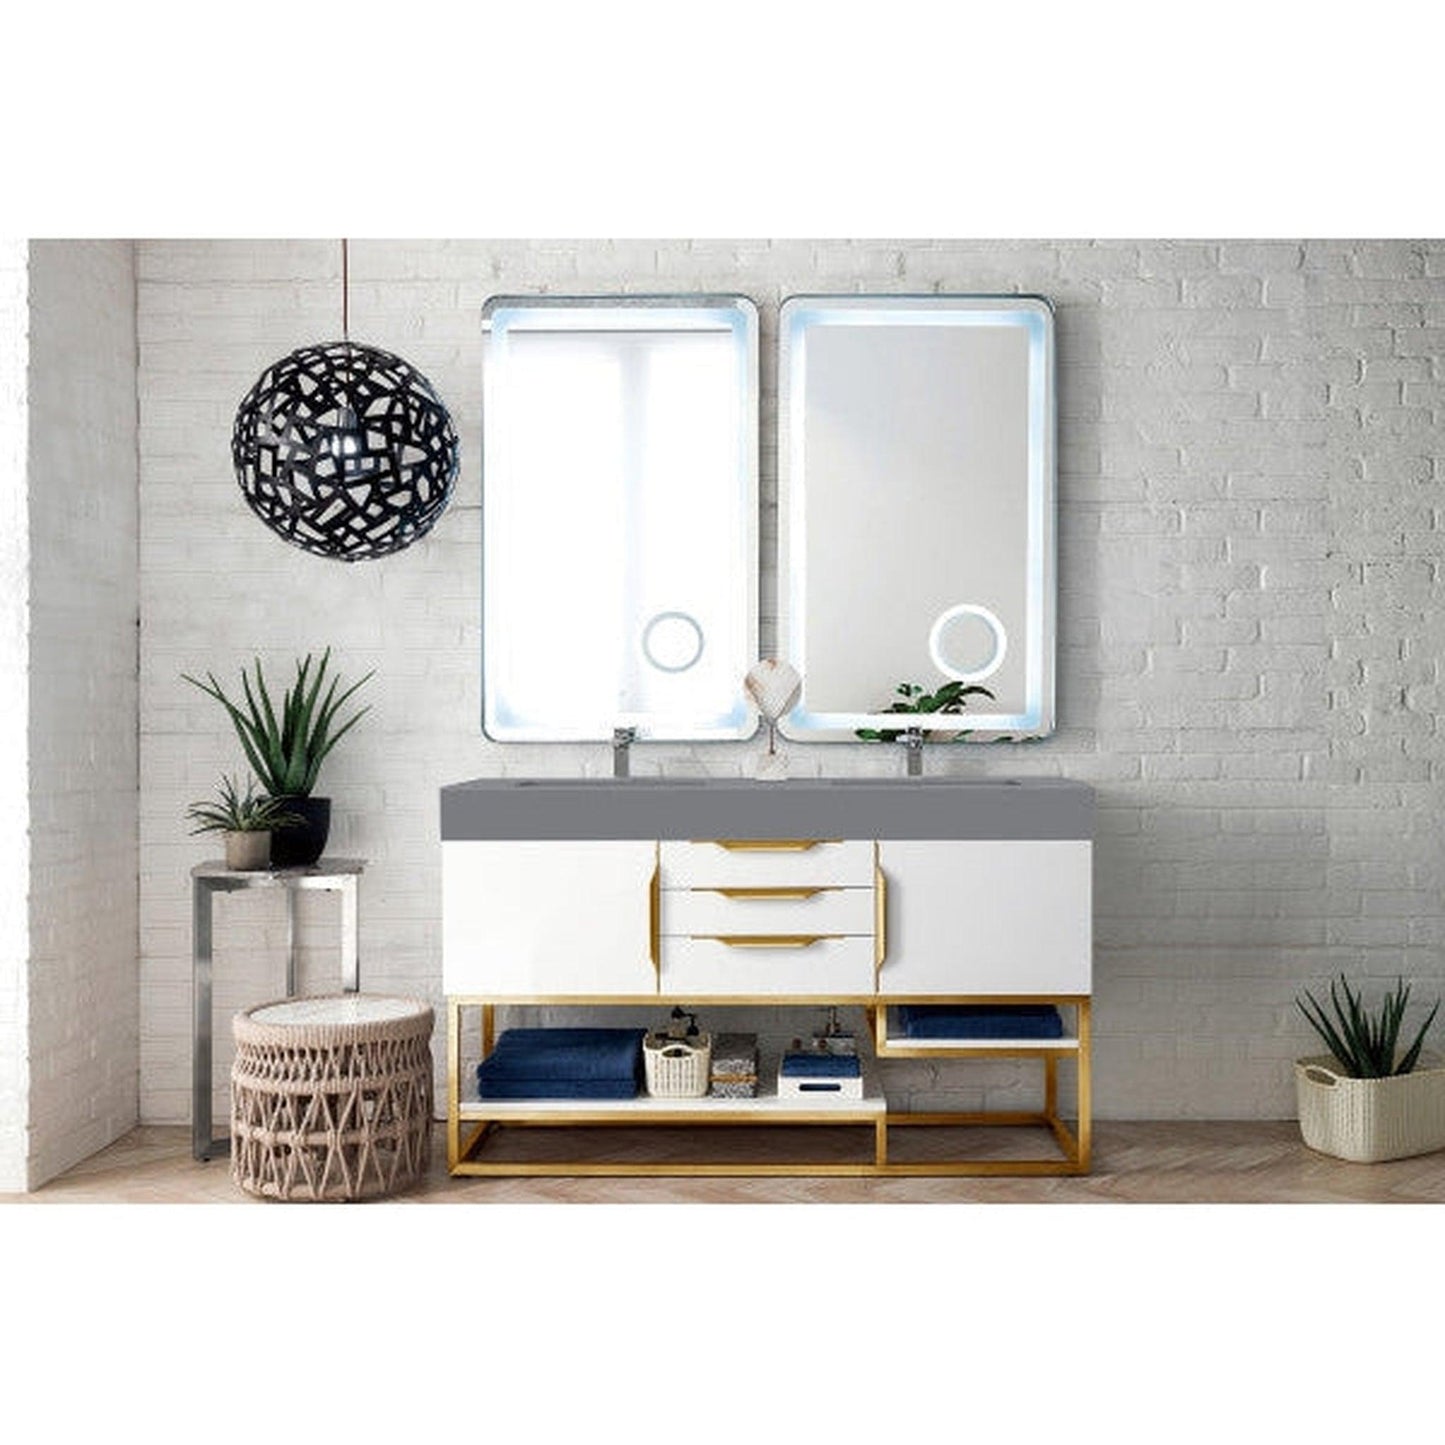 James Martin Columbia 59" Double Glossy White Bathroom Vanity With Radiant Gold Hardware and 6" Glossy Dusk Gray Composite Countertop